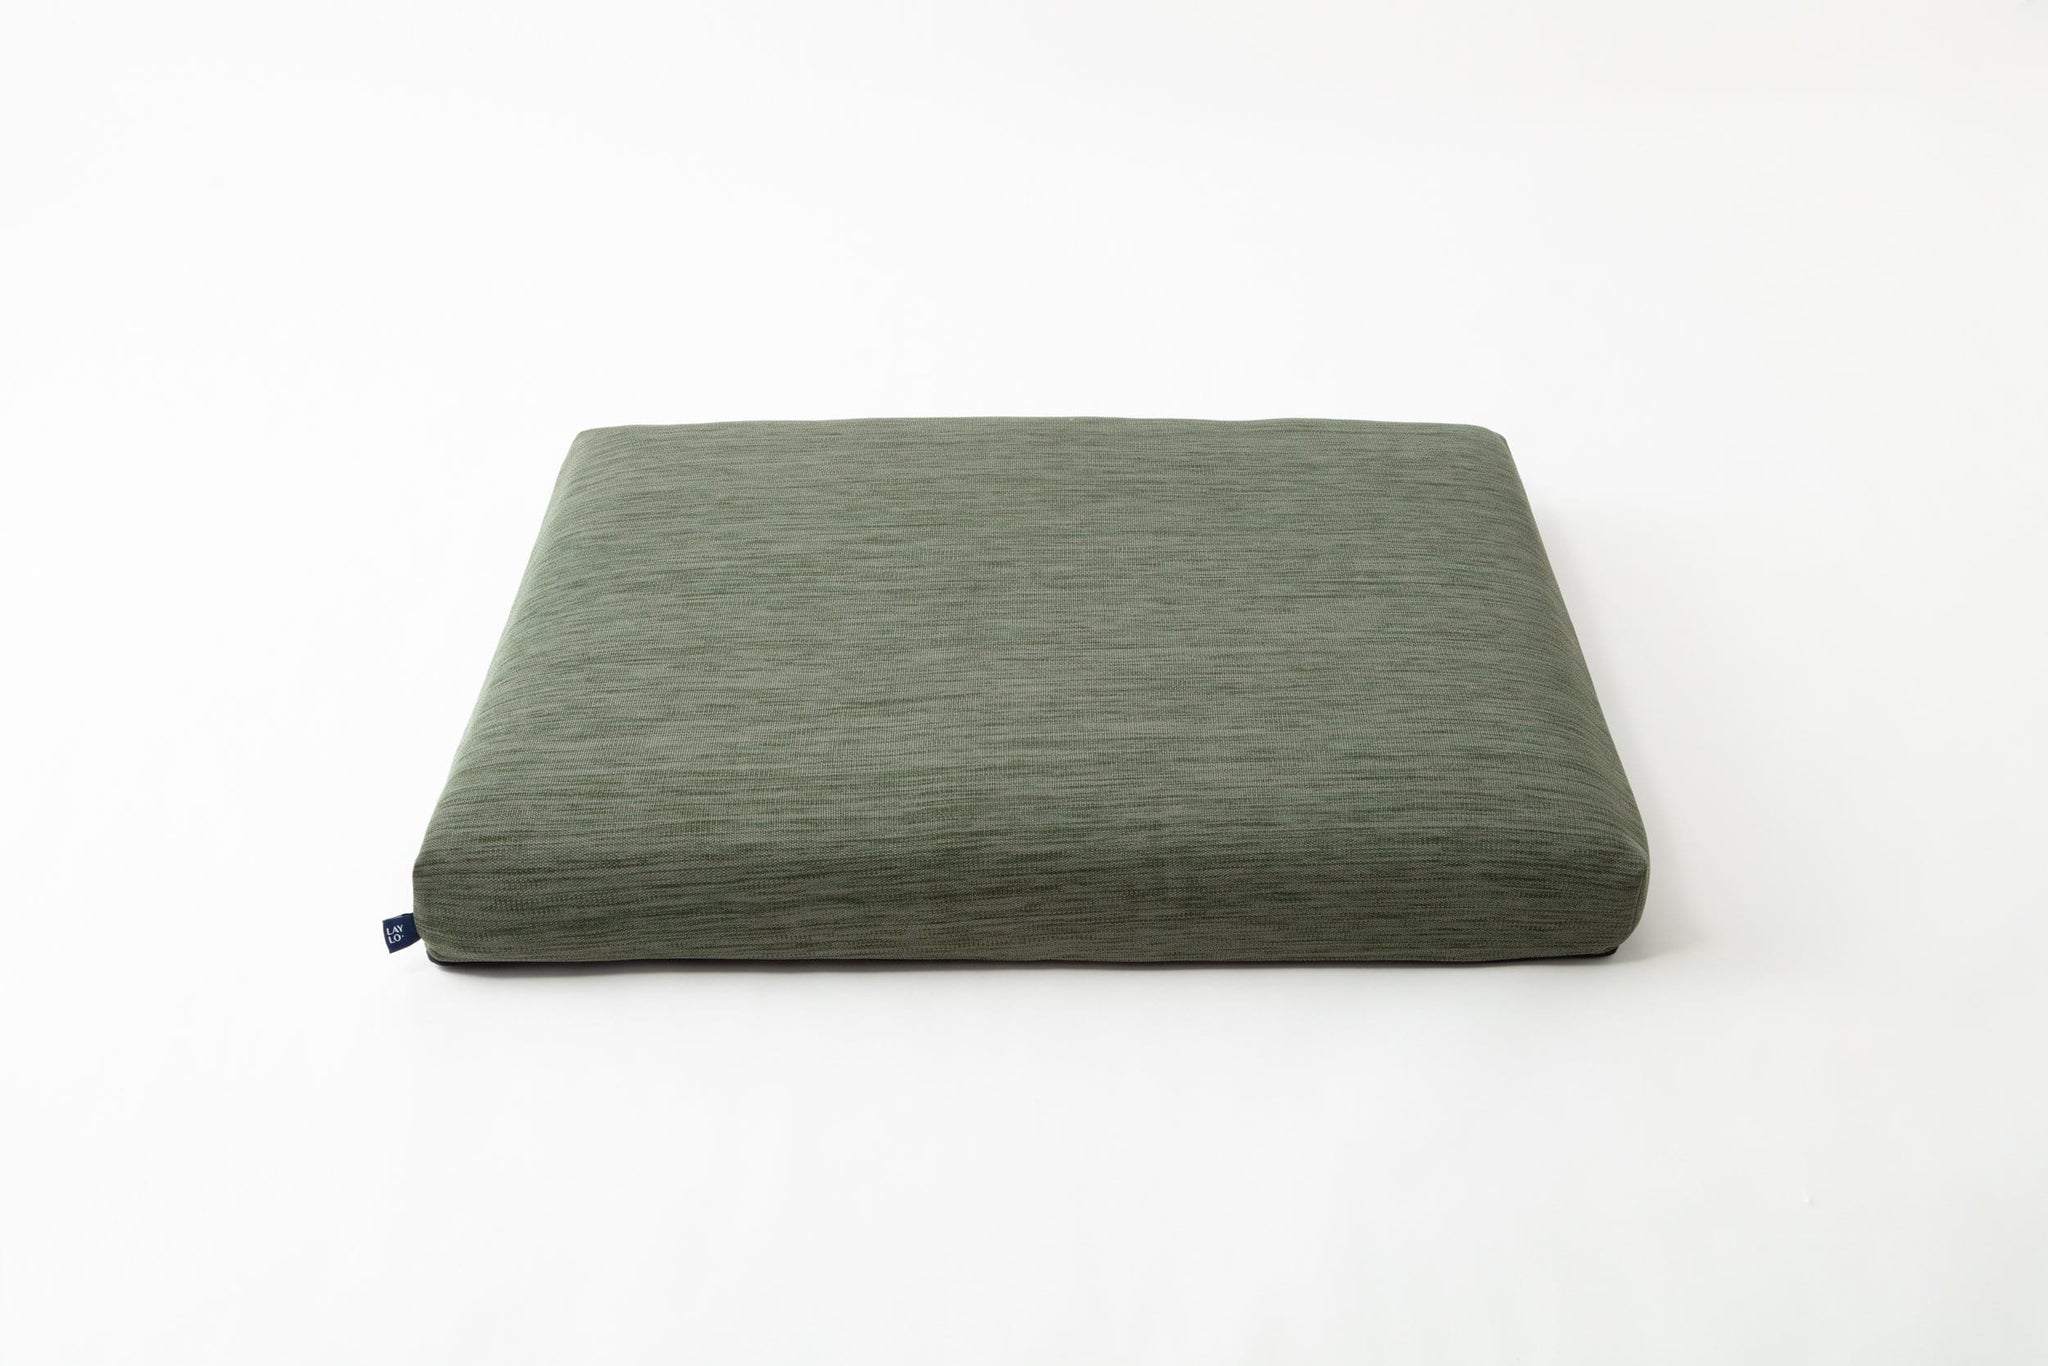 Laylo Pets Minimalist Sage Dog Bed or Bed Cover Lay Lo Pets